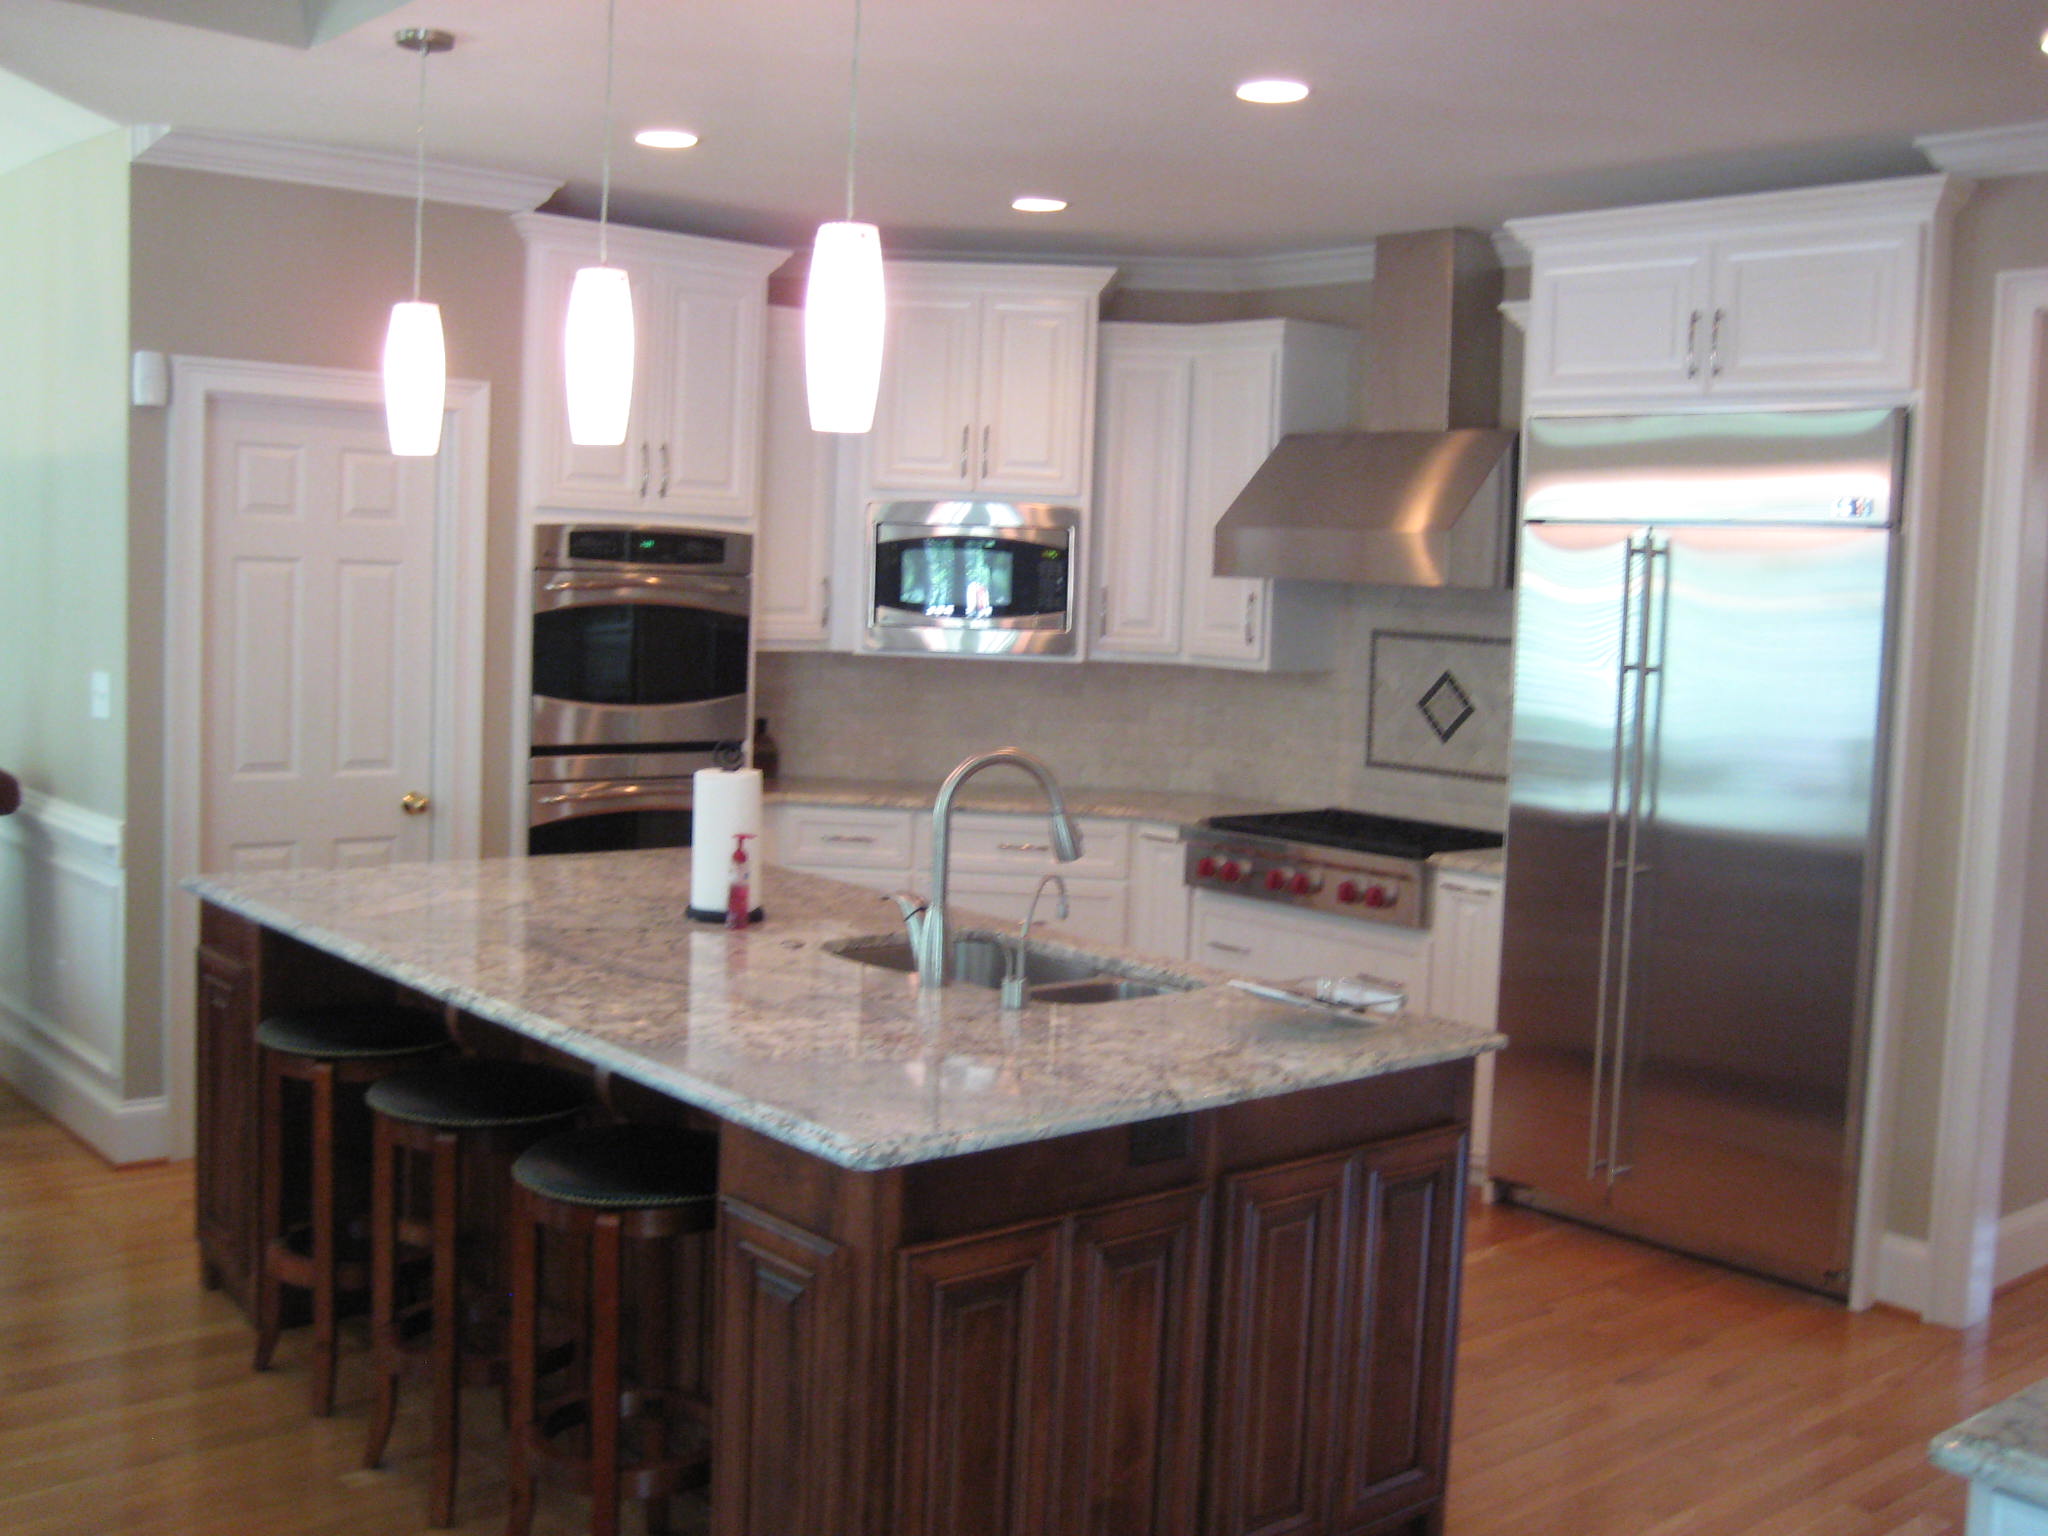 Kitchen renovation with appliances, granite and more.